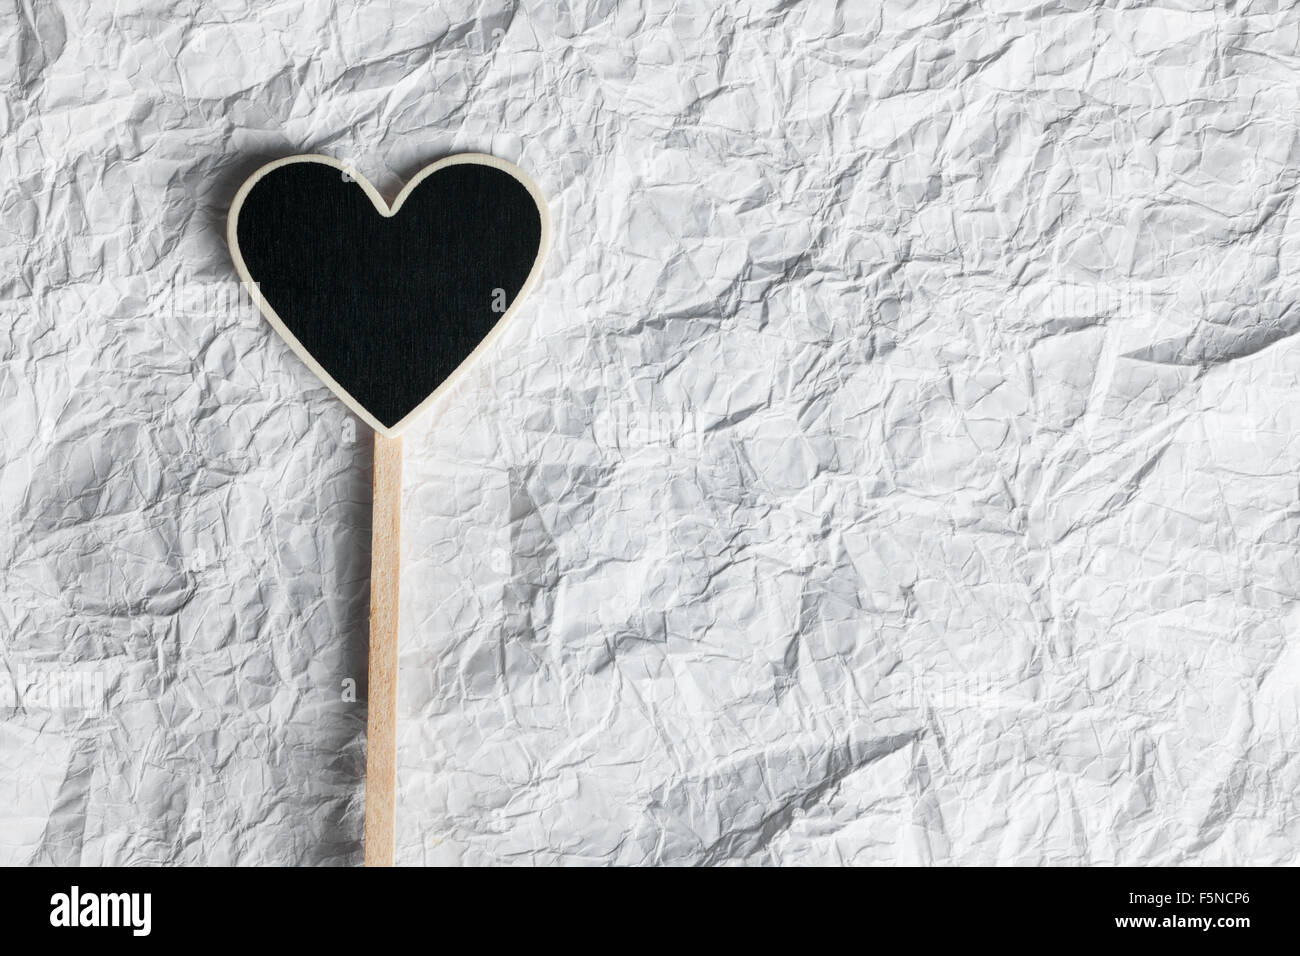 Wooden pointer in the shape of a heart  lying on a crumpled paper, as background Stock Photo